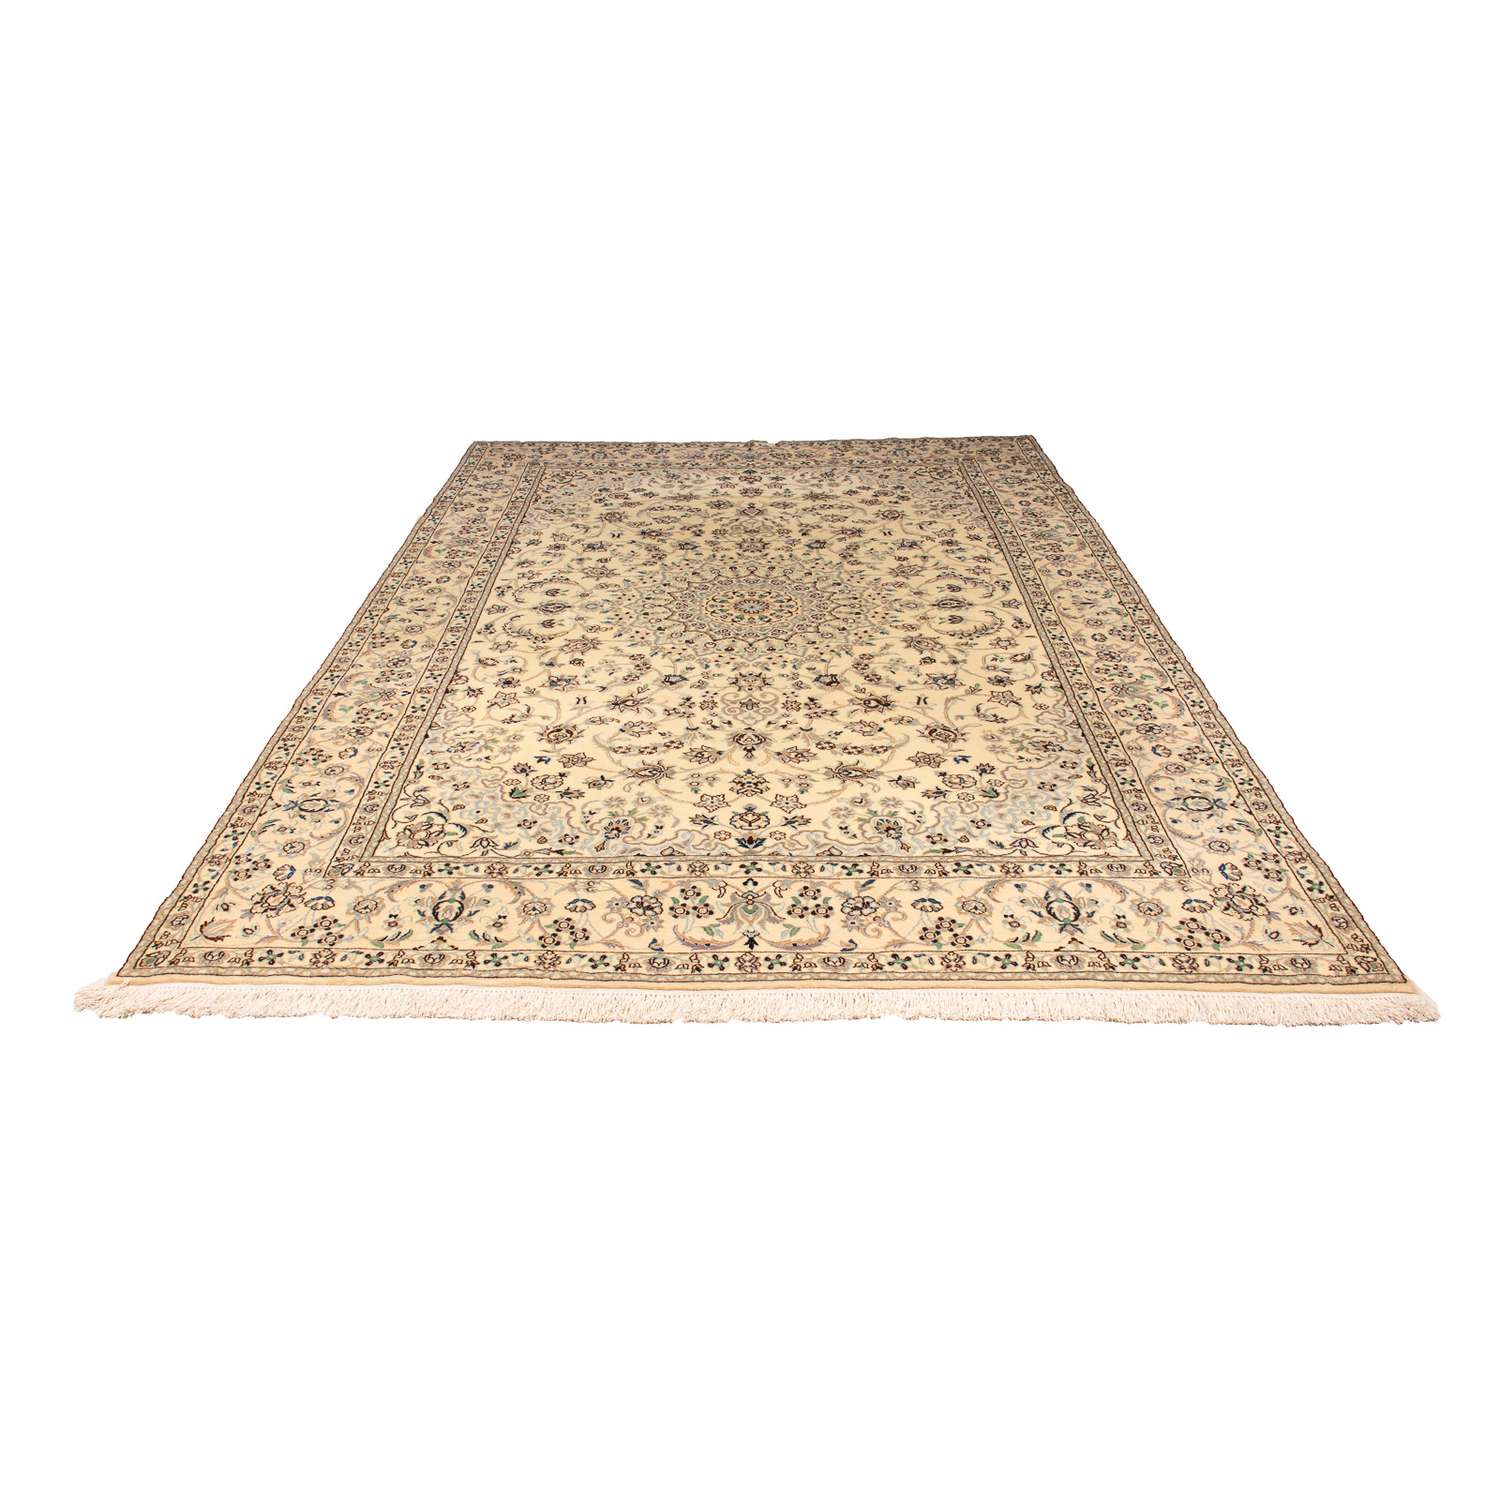 Persisk teppe - Nain - Royal - 323 x 212 cm - beige